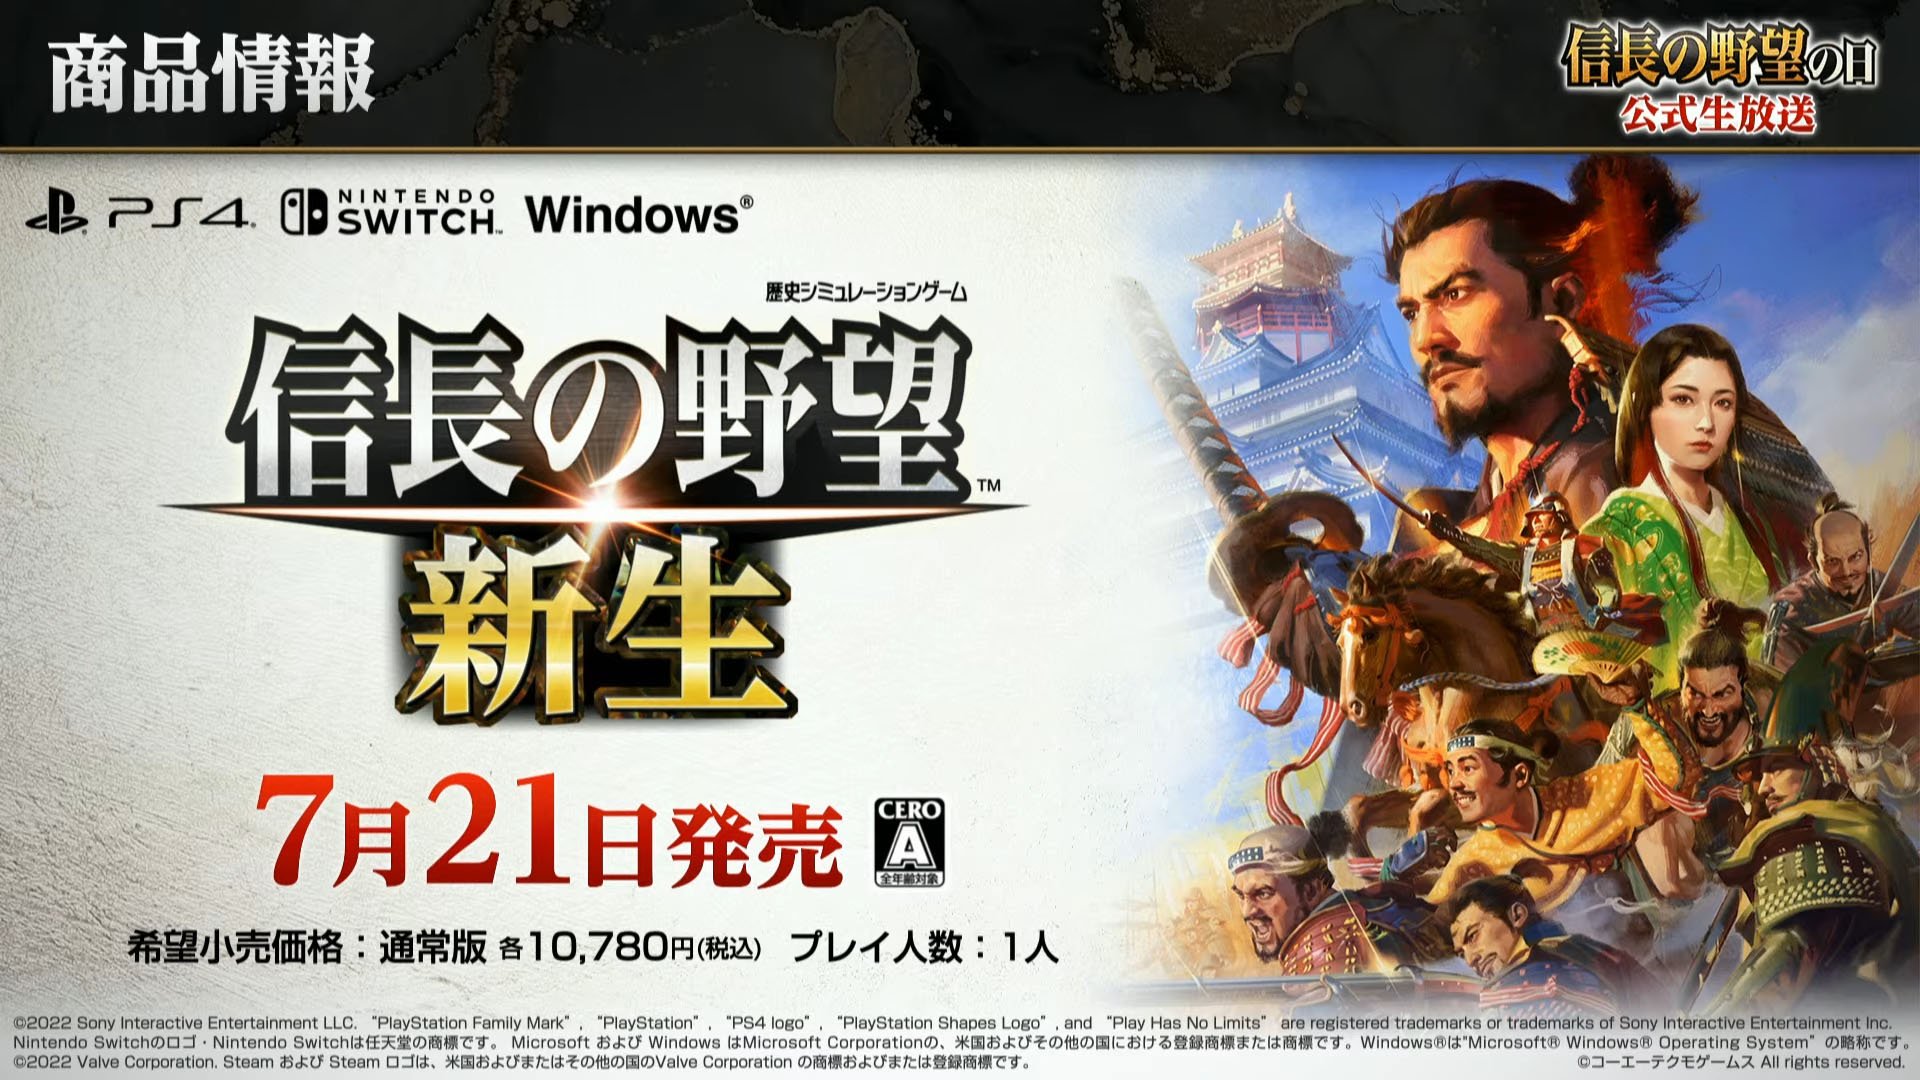 #
      Nobunaga’s Ambition: Rebirth launches July 21 in Japan for PS4, Switch, and PC